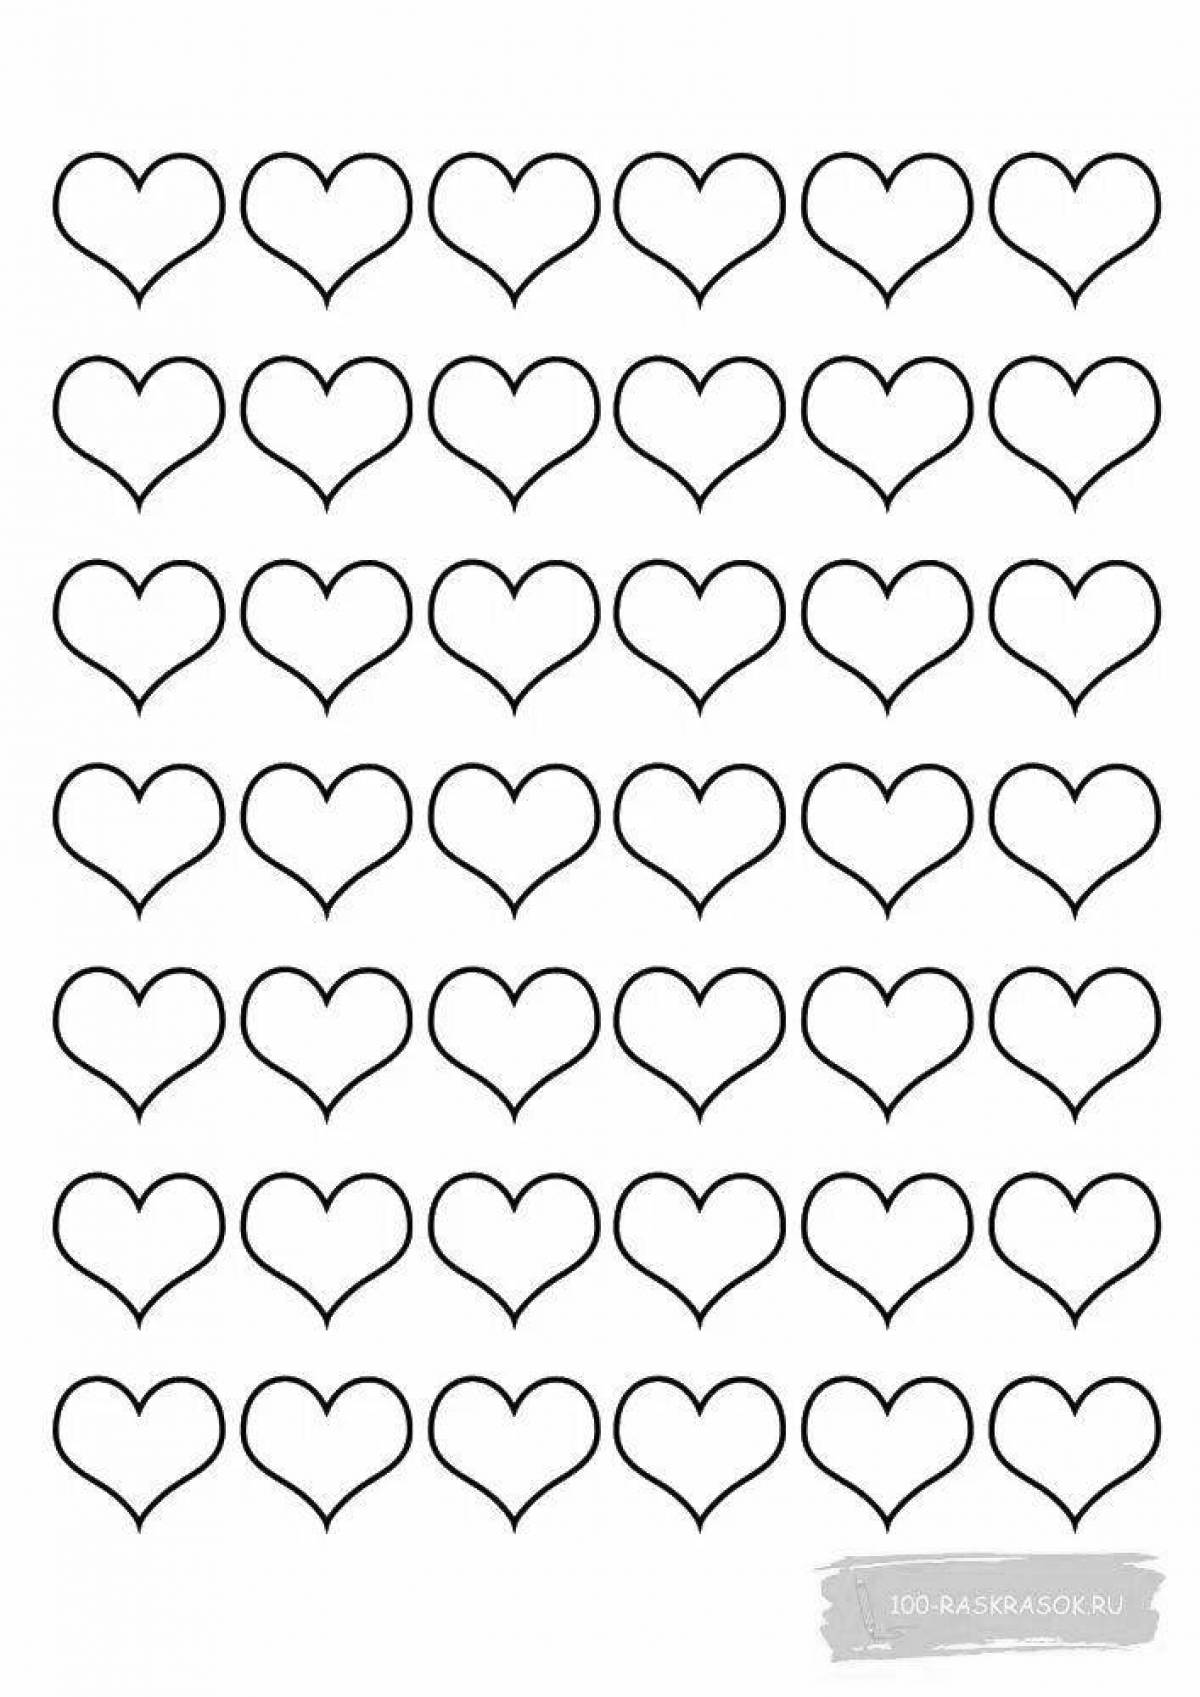 Awesome coloring page with lots of hearts